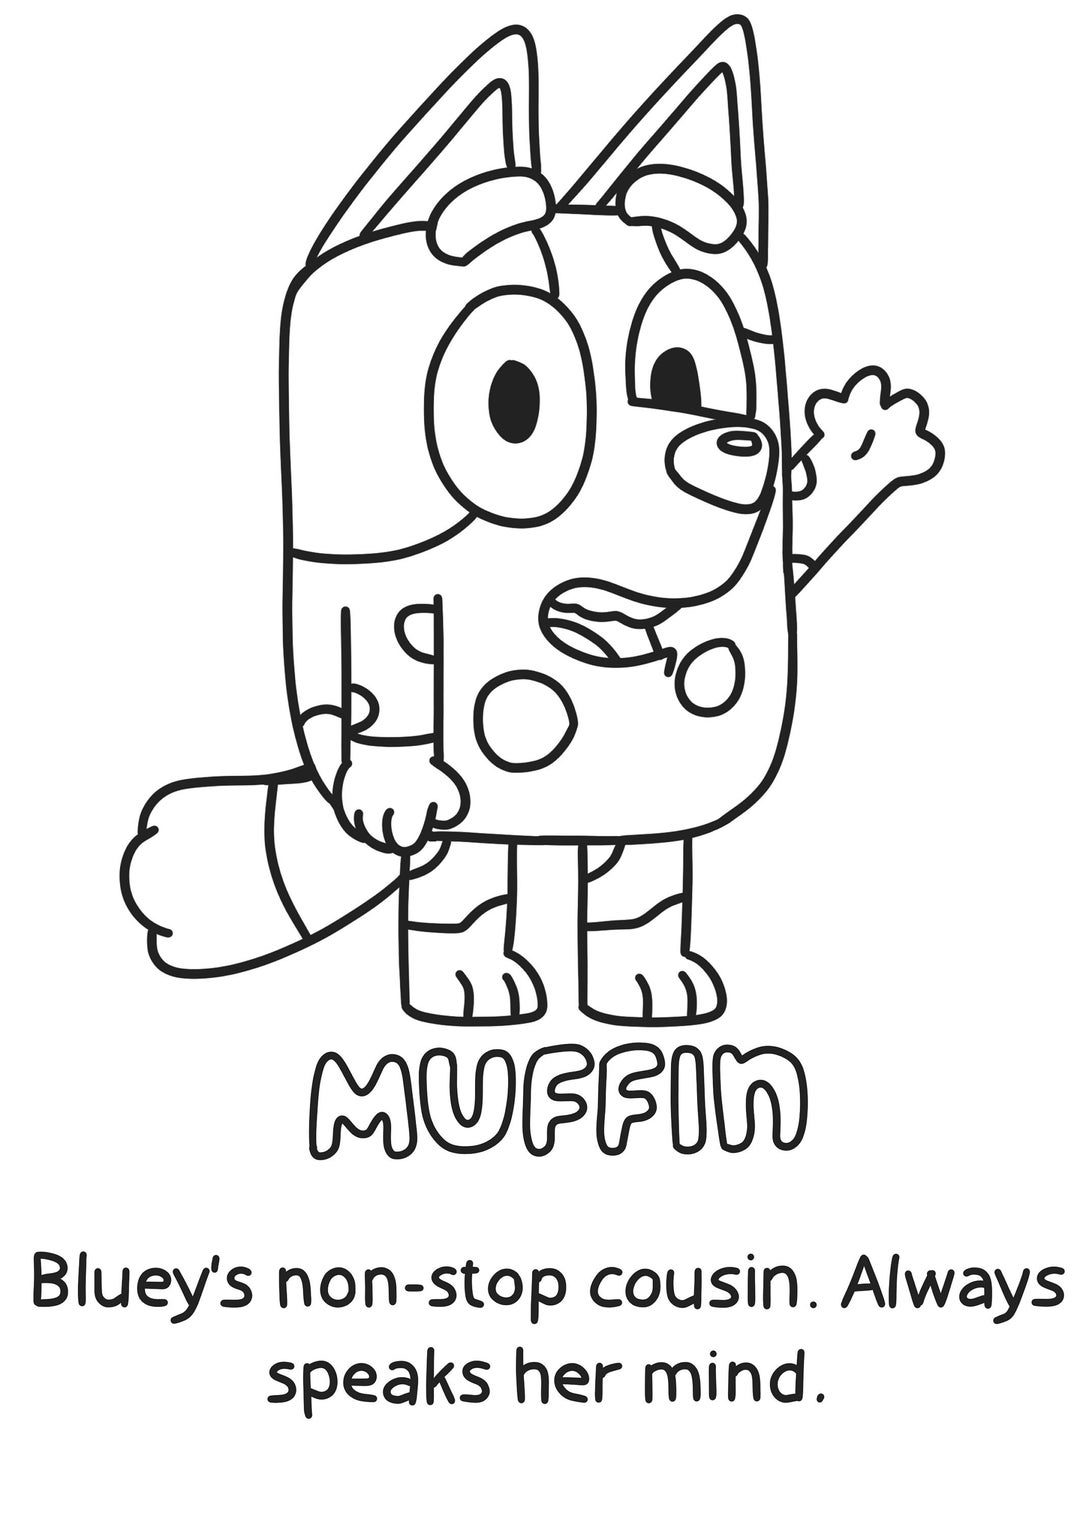 Muffin Colouring Page Bluey - Etsy